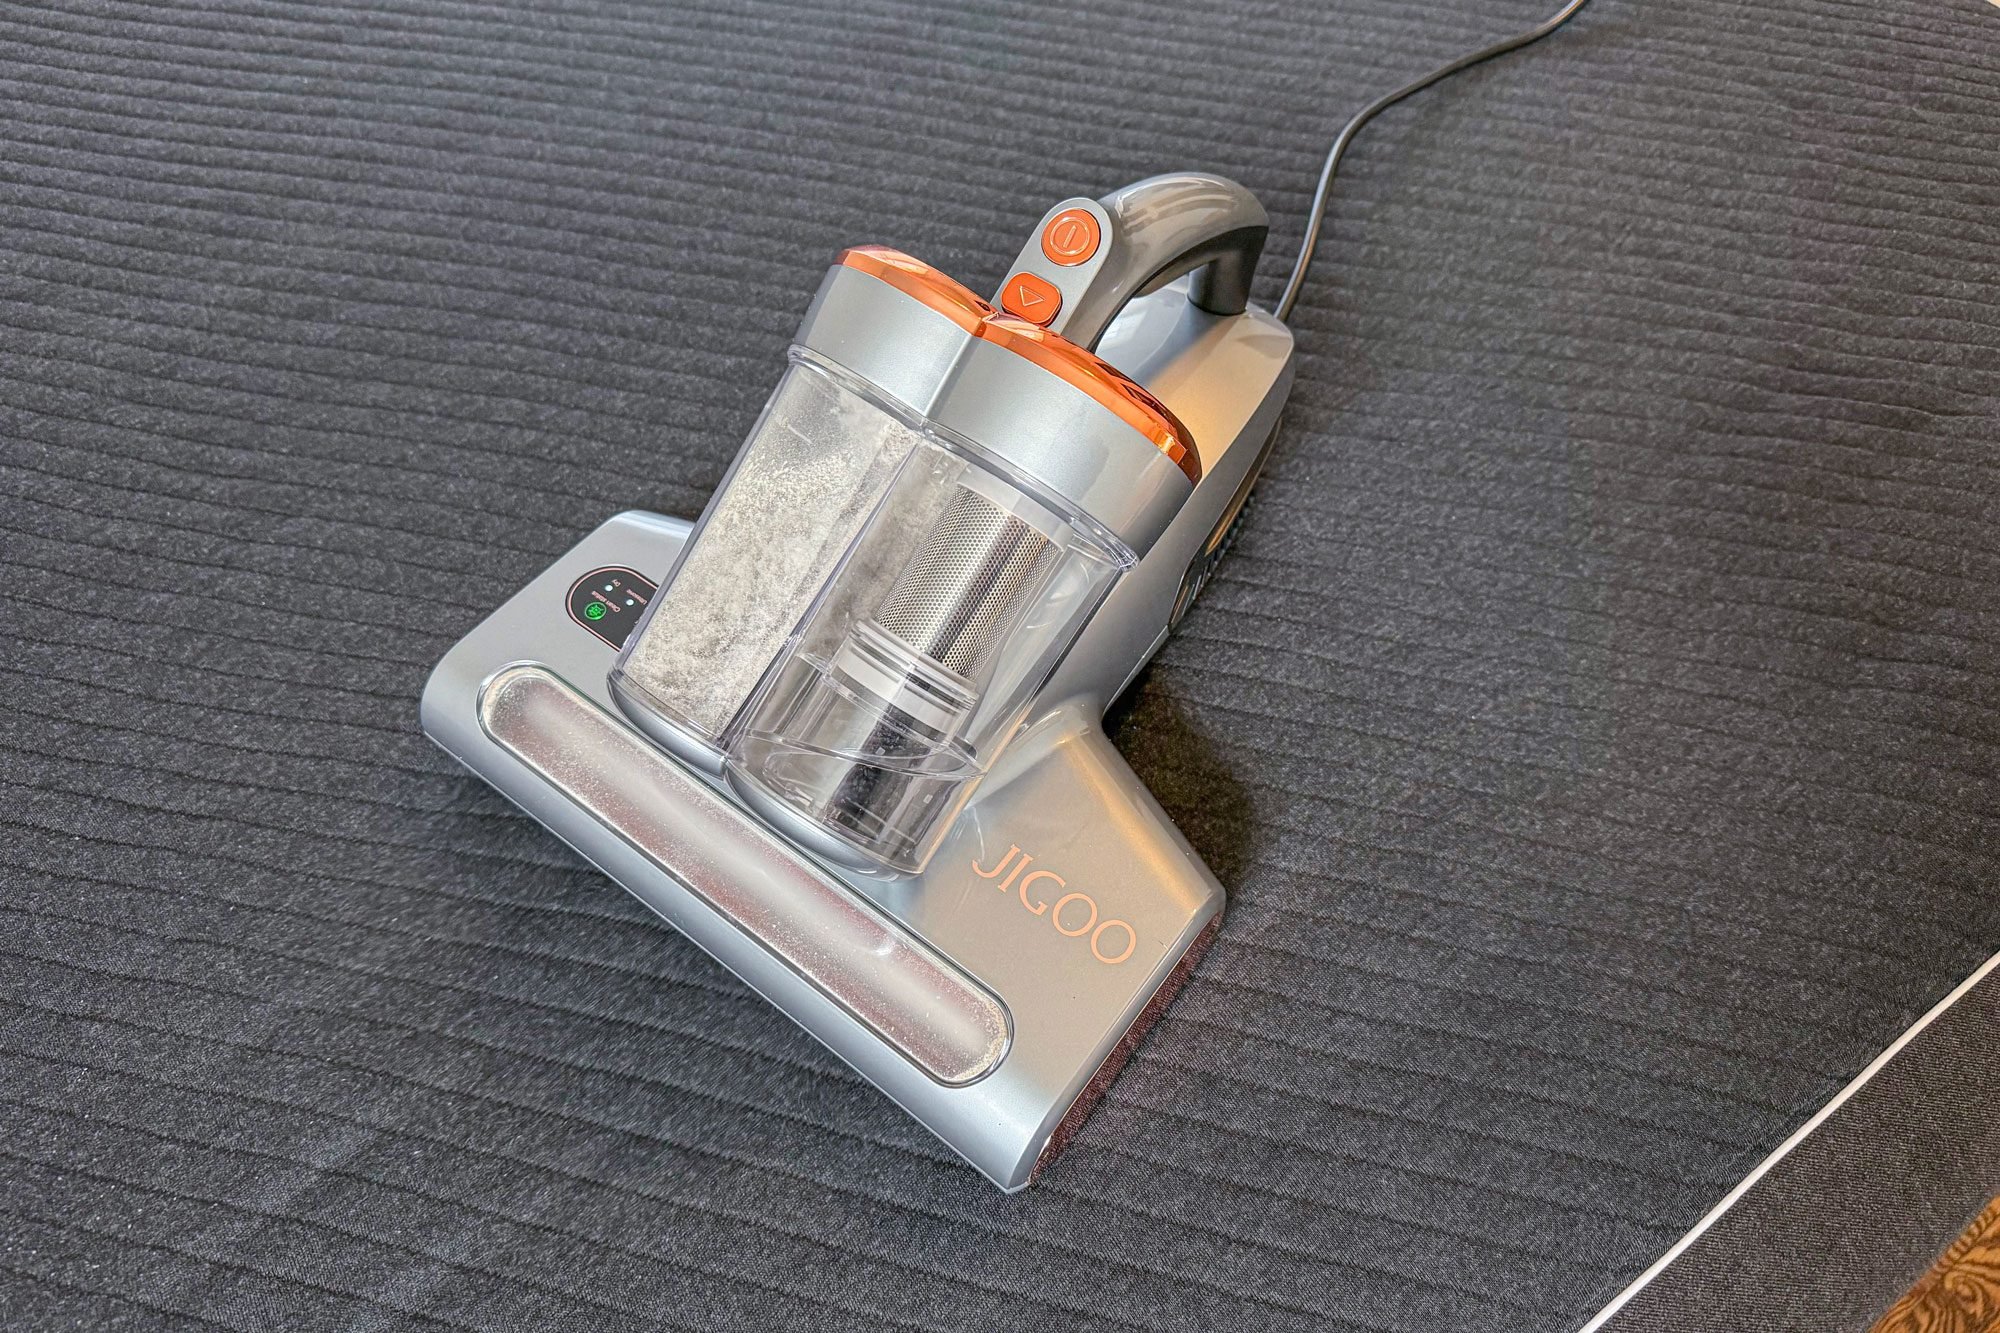 DYSON Vacuum Cleaner - The Index Project